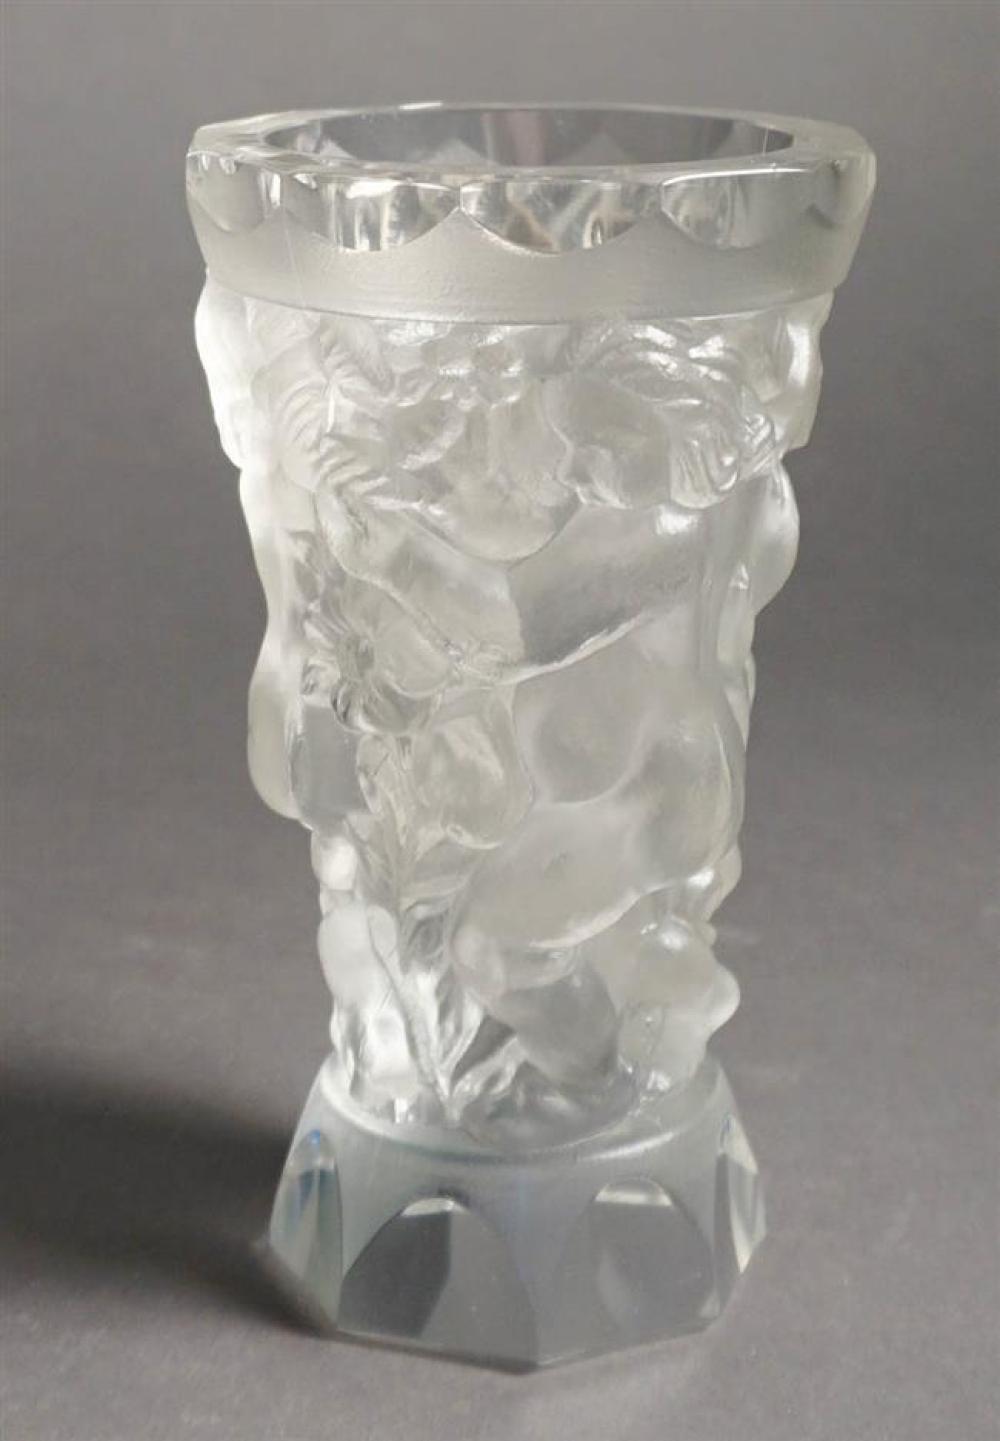 WEIL GLASS CO FROSTED CRYSTAL VASE 324ce1